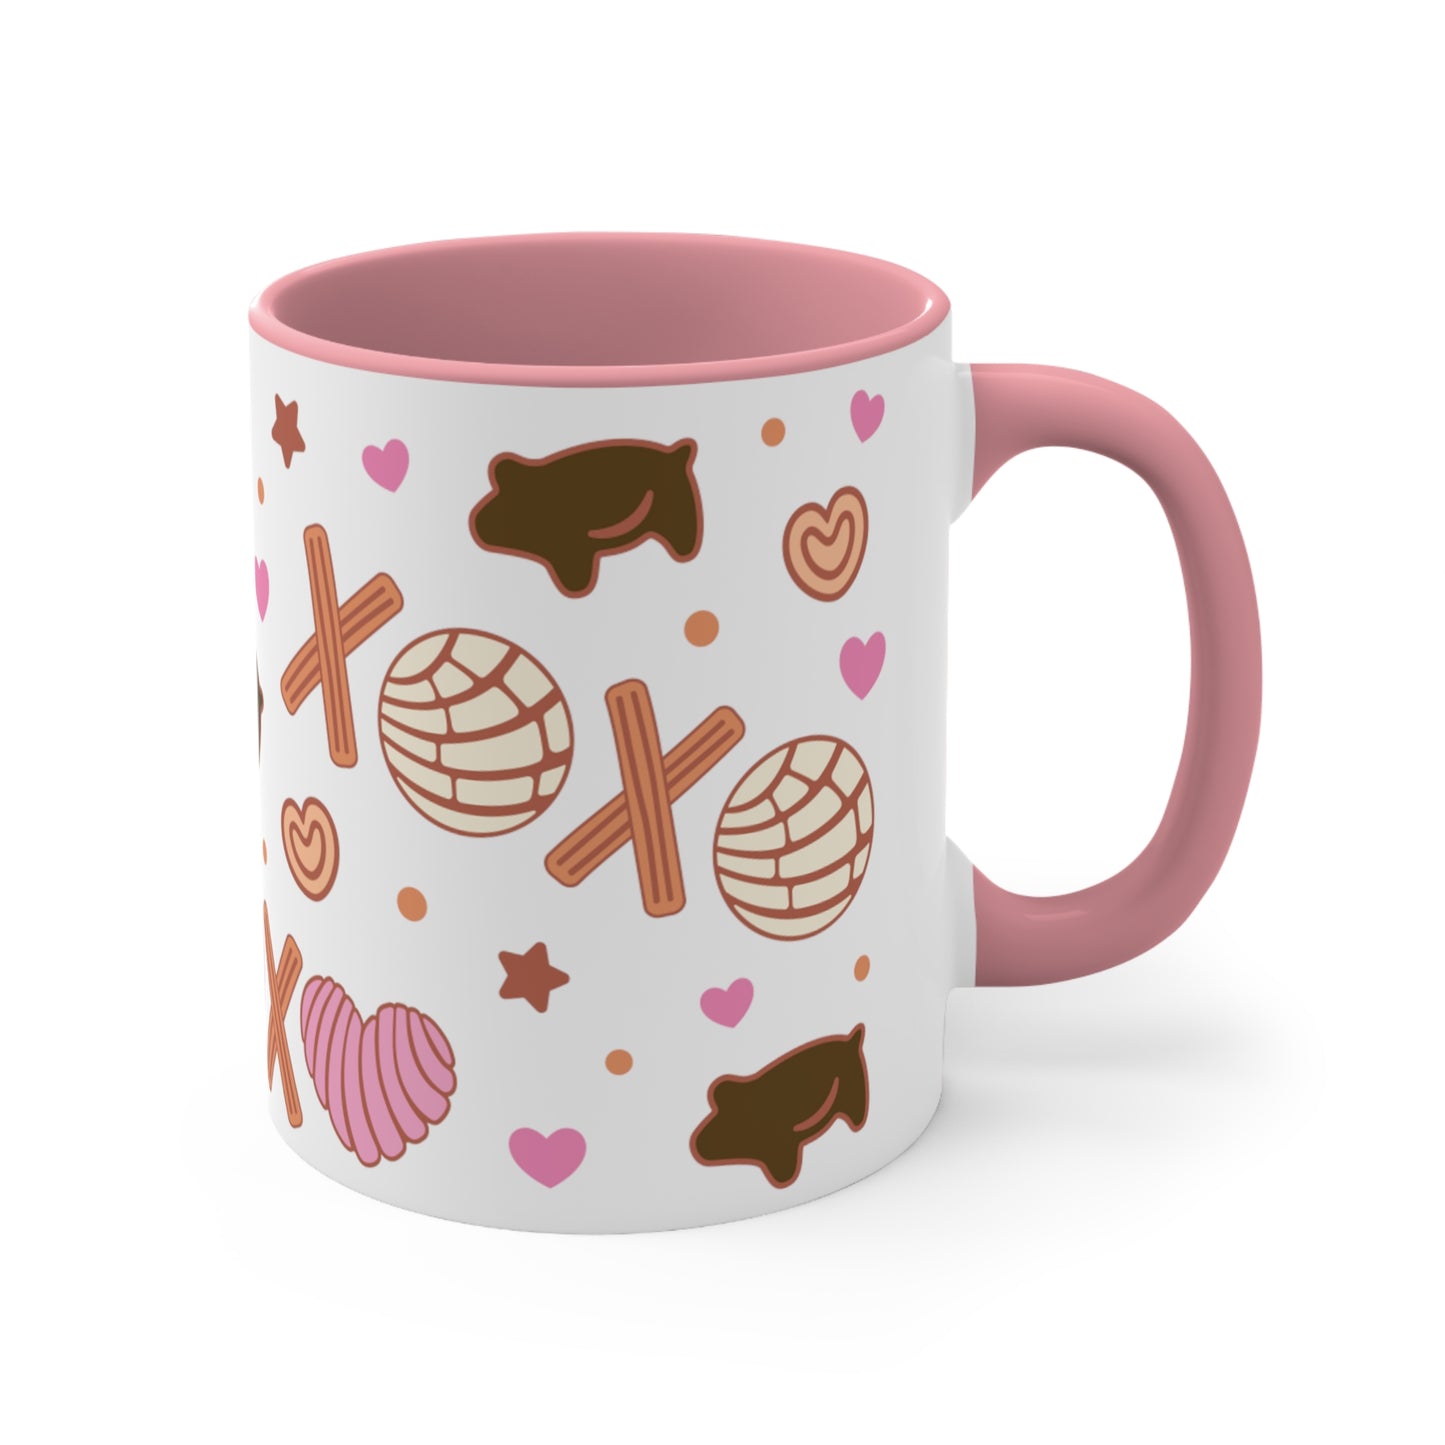 xoxo pan dulce Coffee Mug 11oz for Mexican girlfriend or concha lover. Mexican mug for her. Valentines Day gift . Concha churros y puerquito